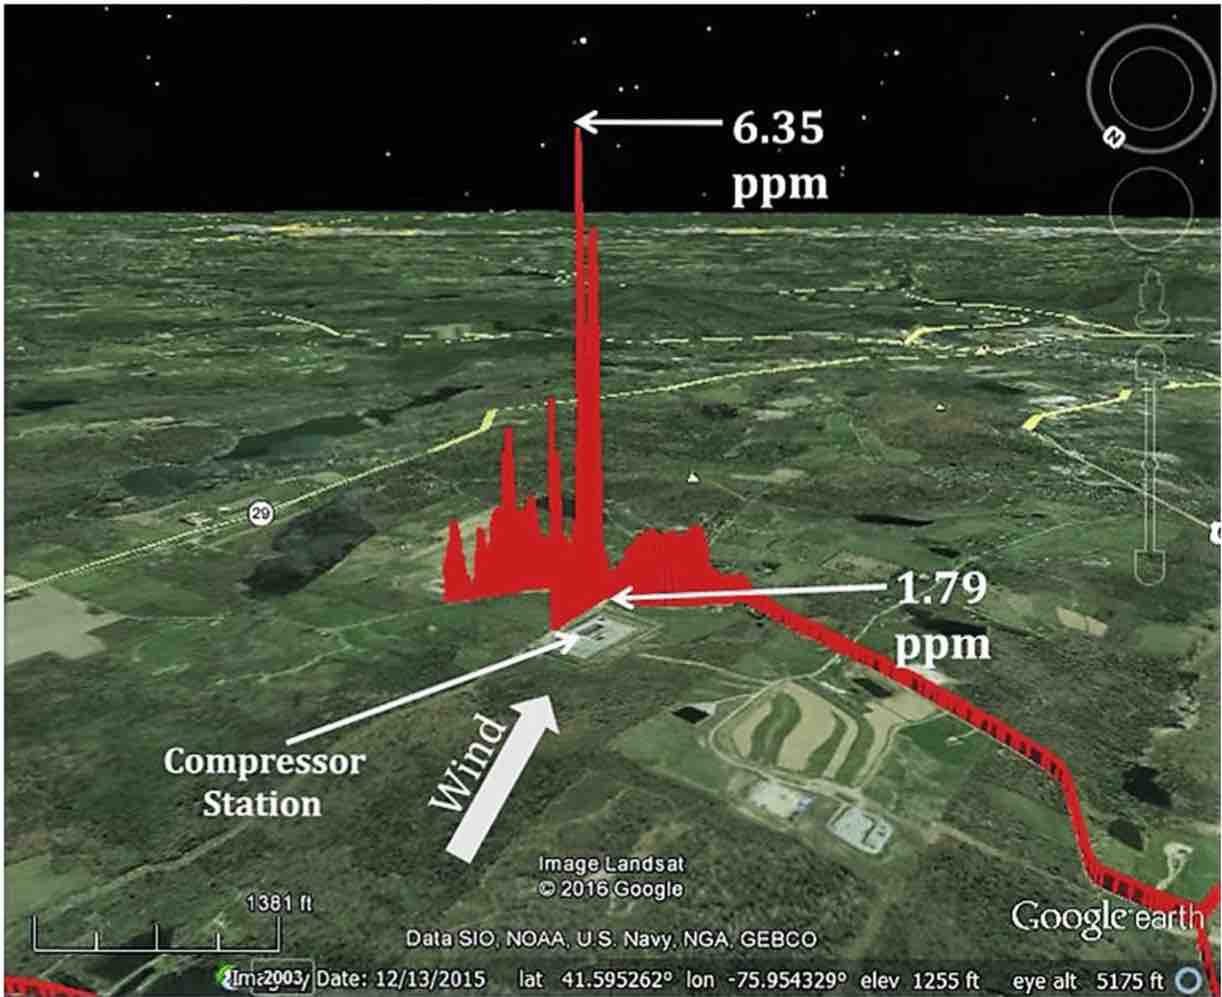 Methane emission plumes from compressor stations near Springvale, Pennsylvania